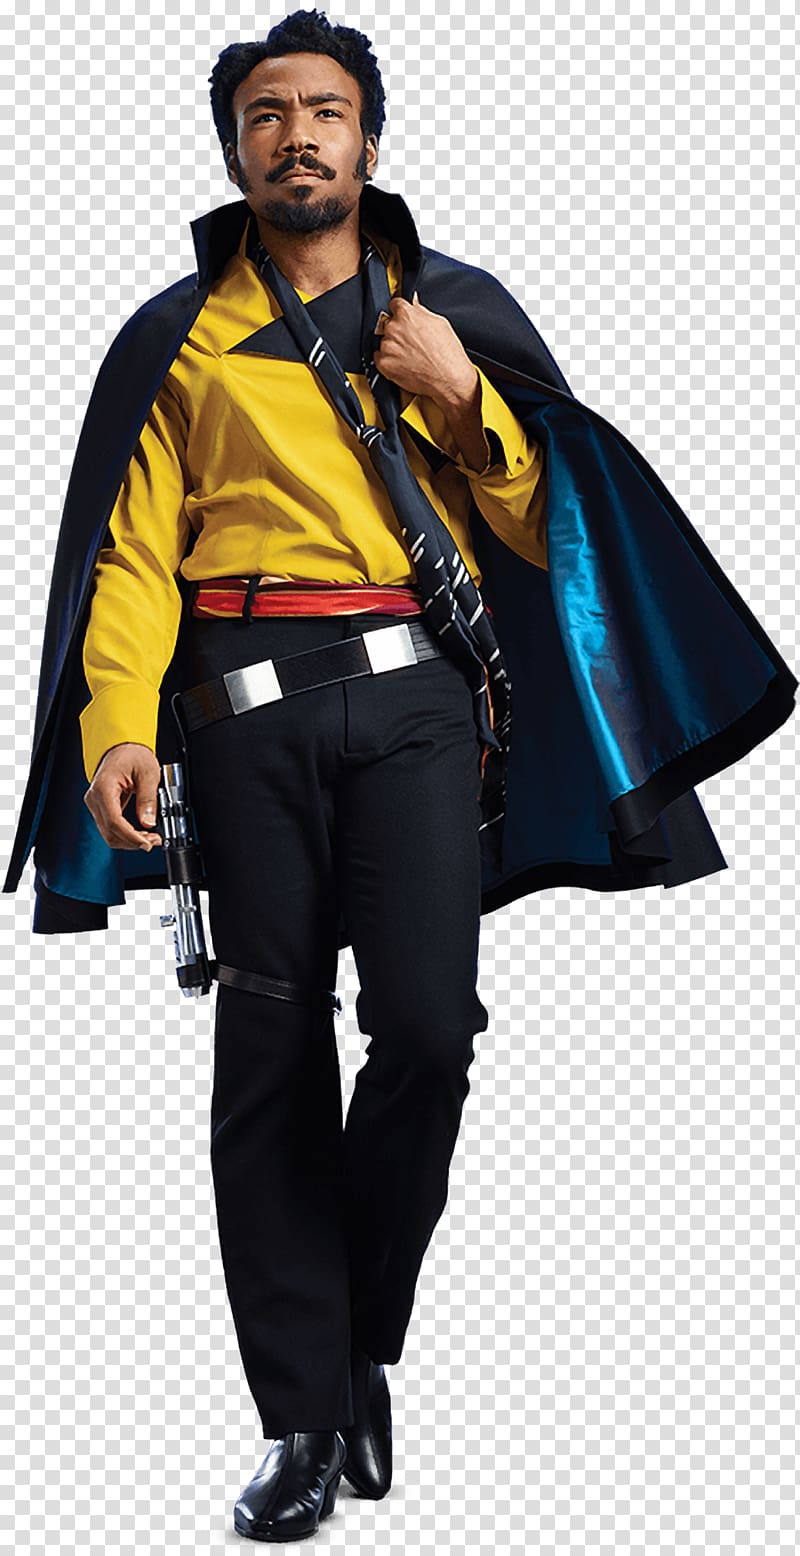 Ron Howard Solo: A Star Wars Story Lando Calrissian Han Solo Chewbacca, star wars transparent background PNG clipart